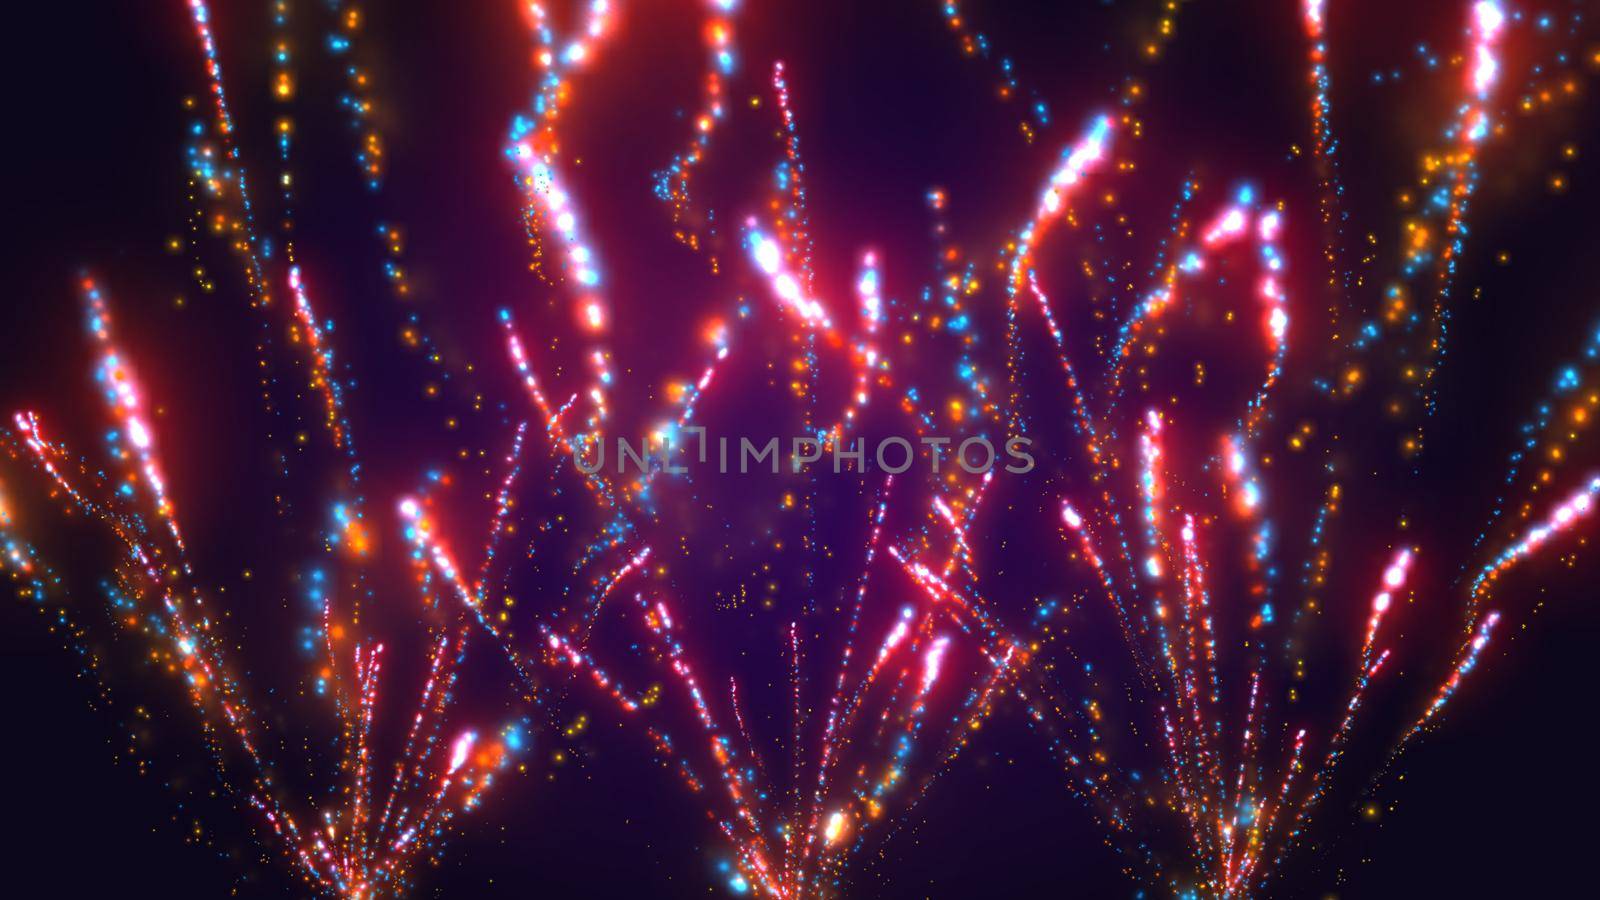 Abstract purple background with multicolored fireworks